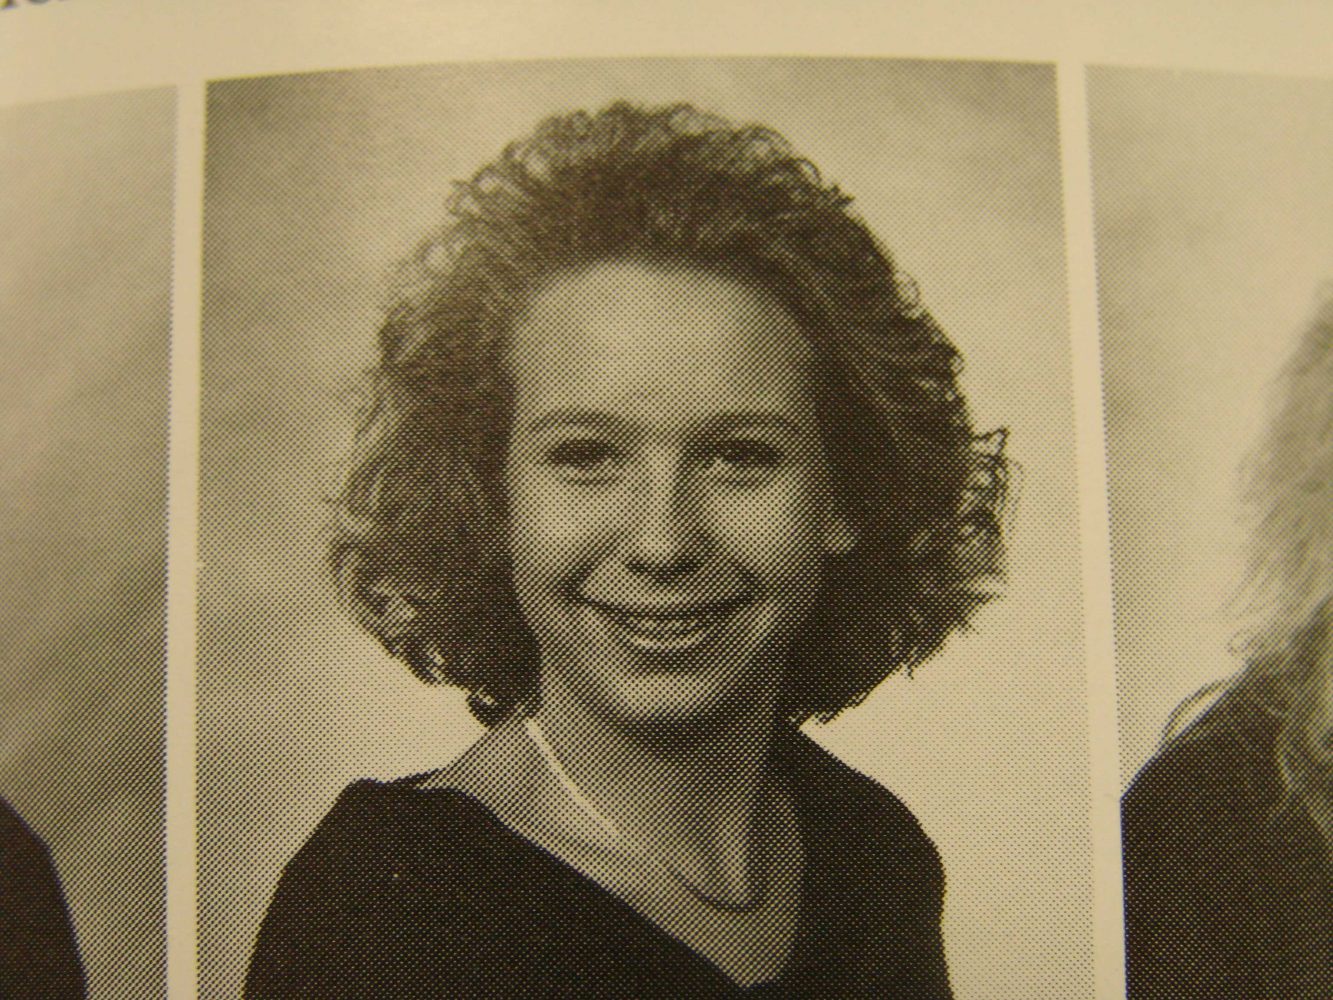 Theresa Hake graduated from Pattonville High School in 1992. Her daughter, Alyssa, now attends the school and will graduate in 2014.